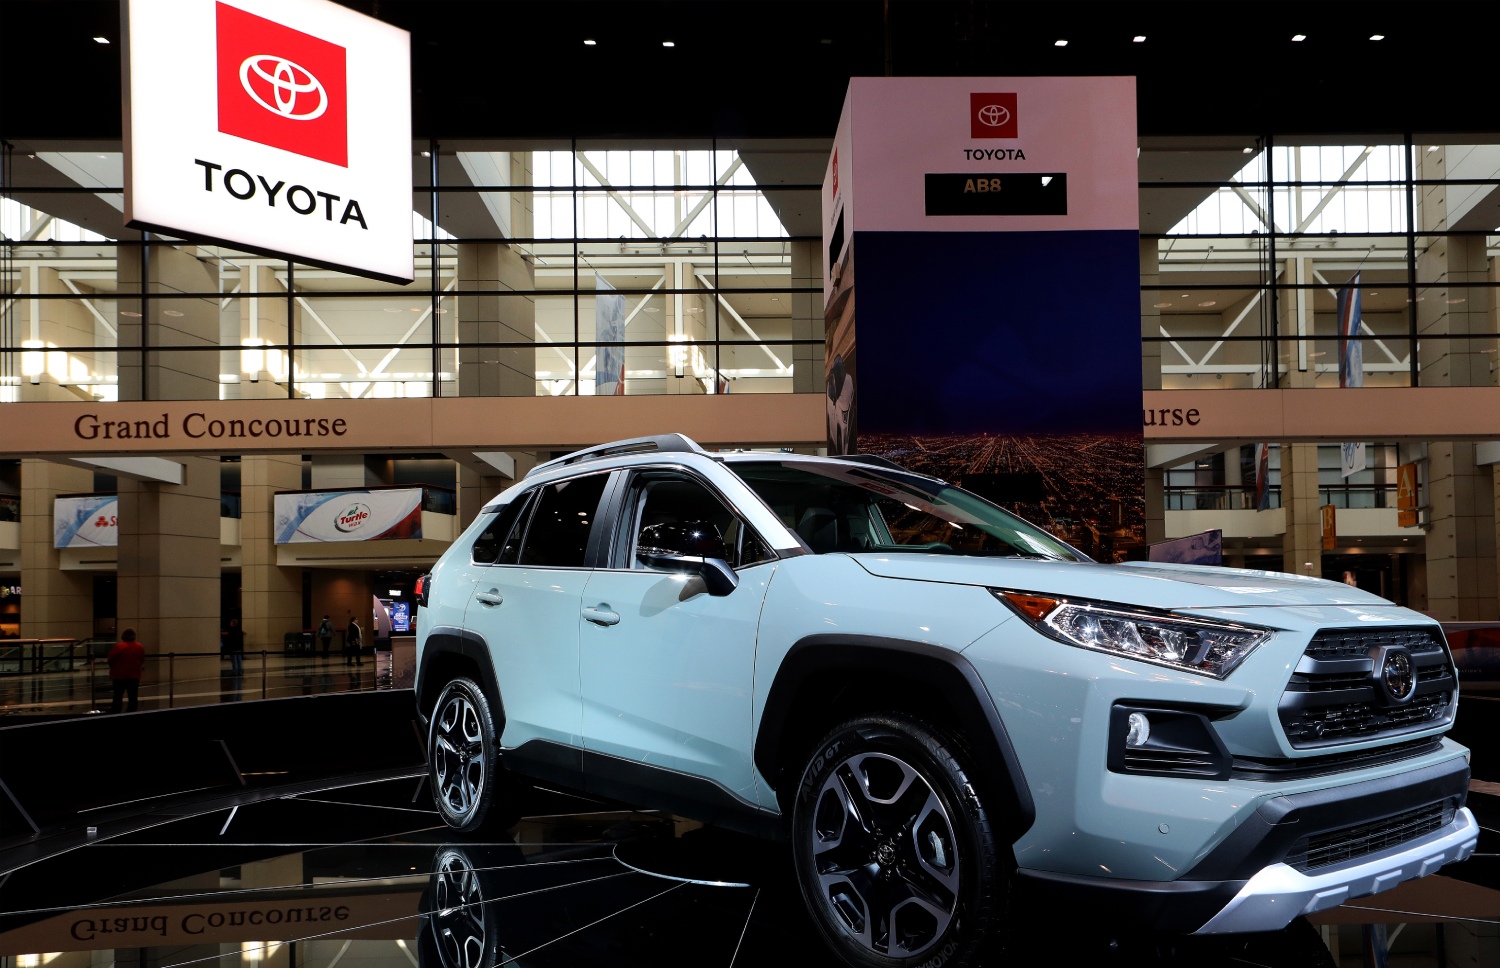 Toyota tune-up costs on an SUV like this white RAV4 are affordable